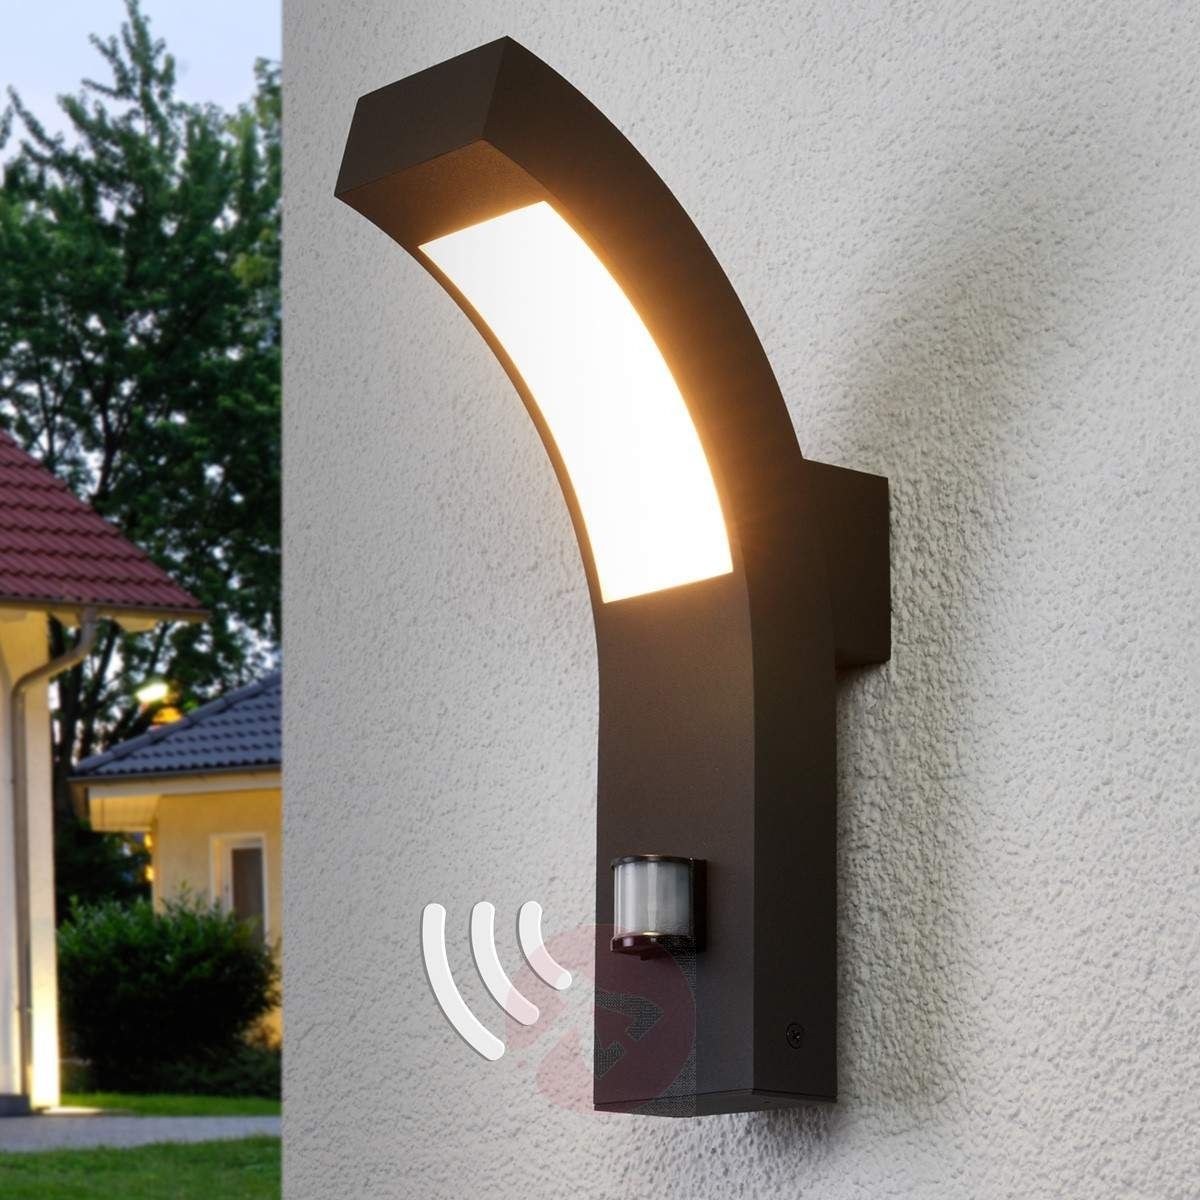 Wall Lamp To Enhance The Decoration Of The Wall | Home Design For Outside Wall Lights For House (View 8 of 15)